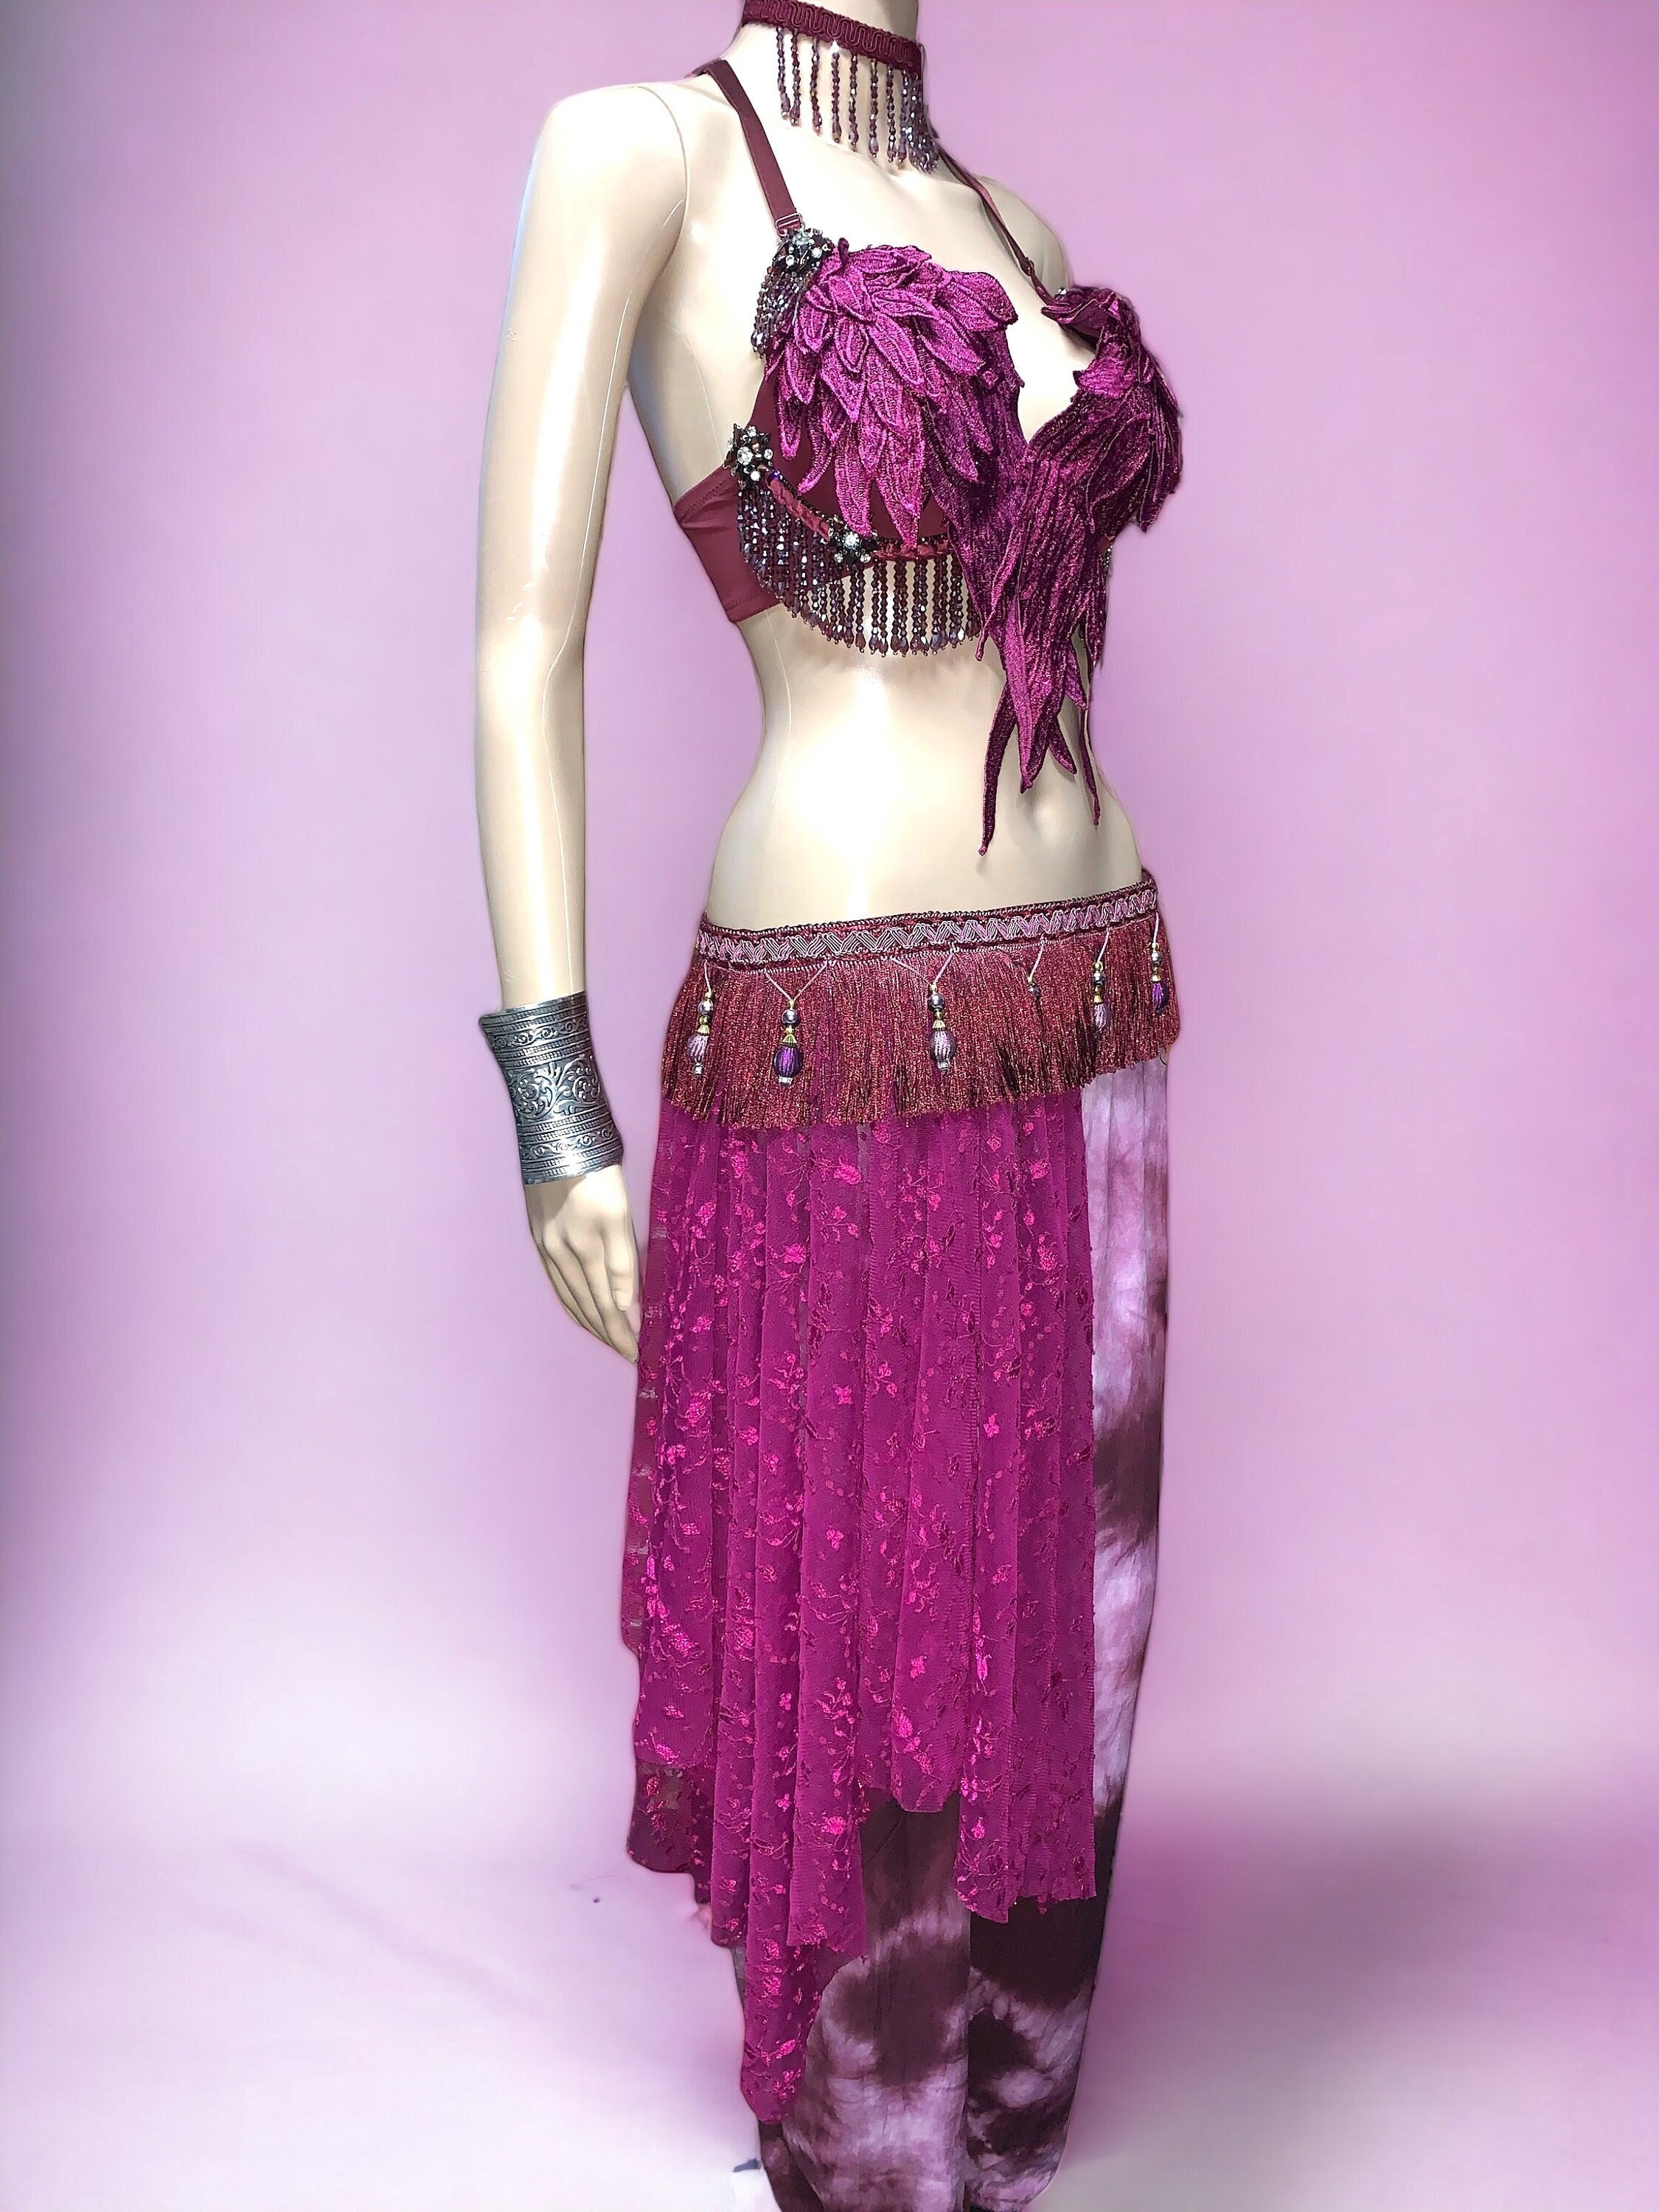 Lace Tribal Belly Dance Bra Top Halter Neck Gothic Gypsy Bohemian